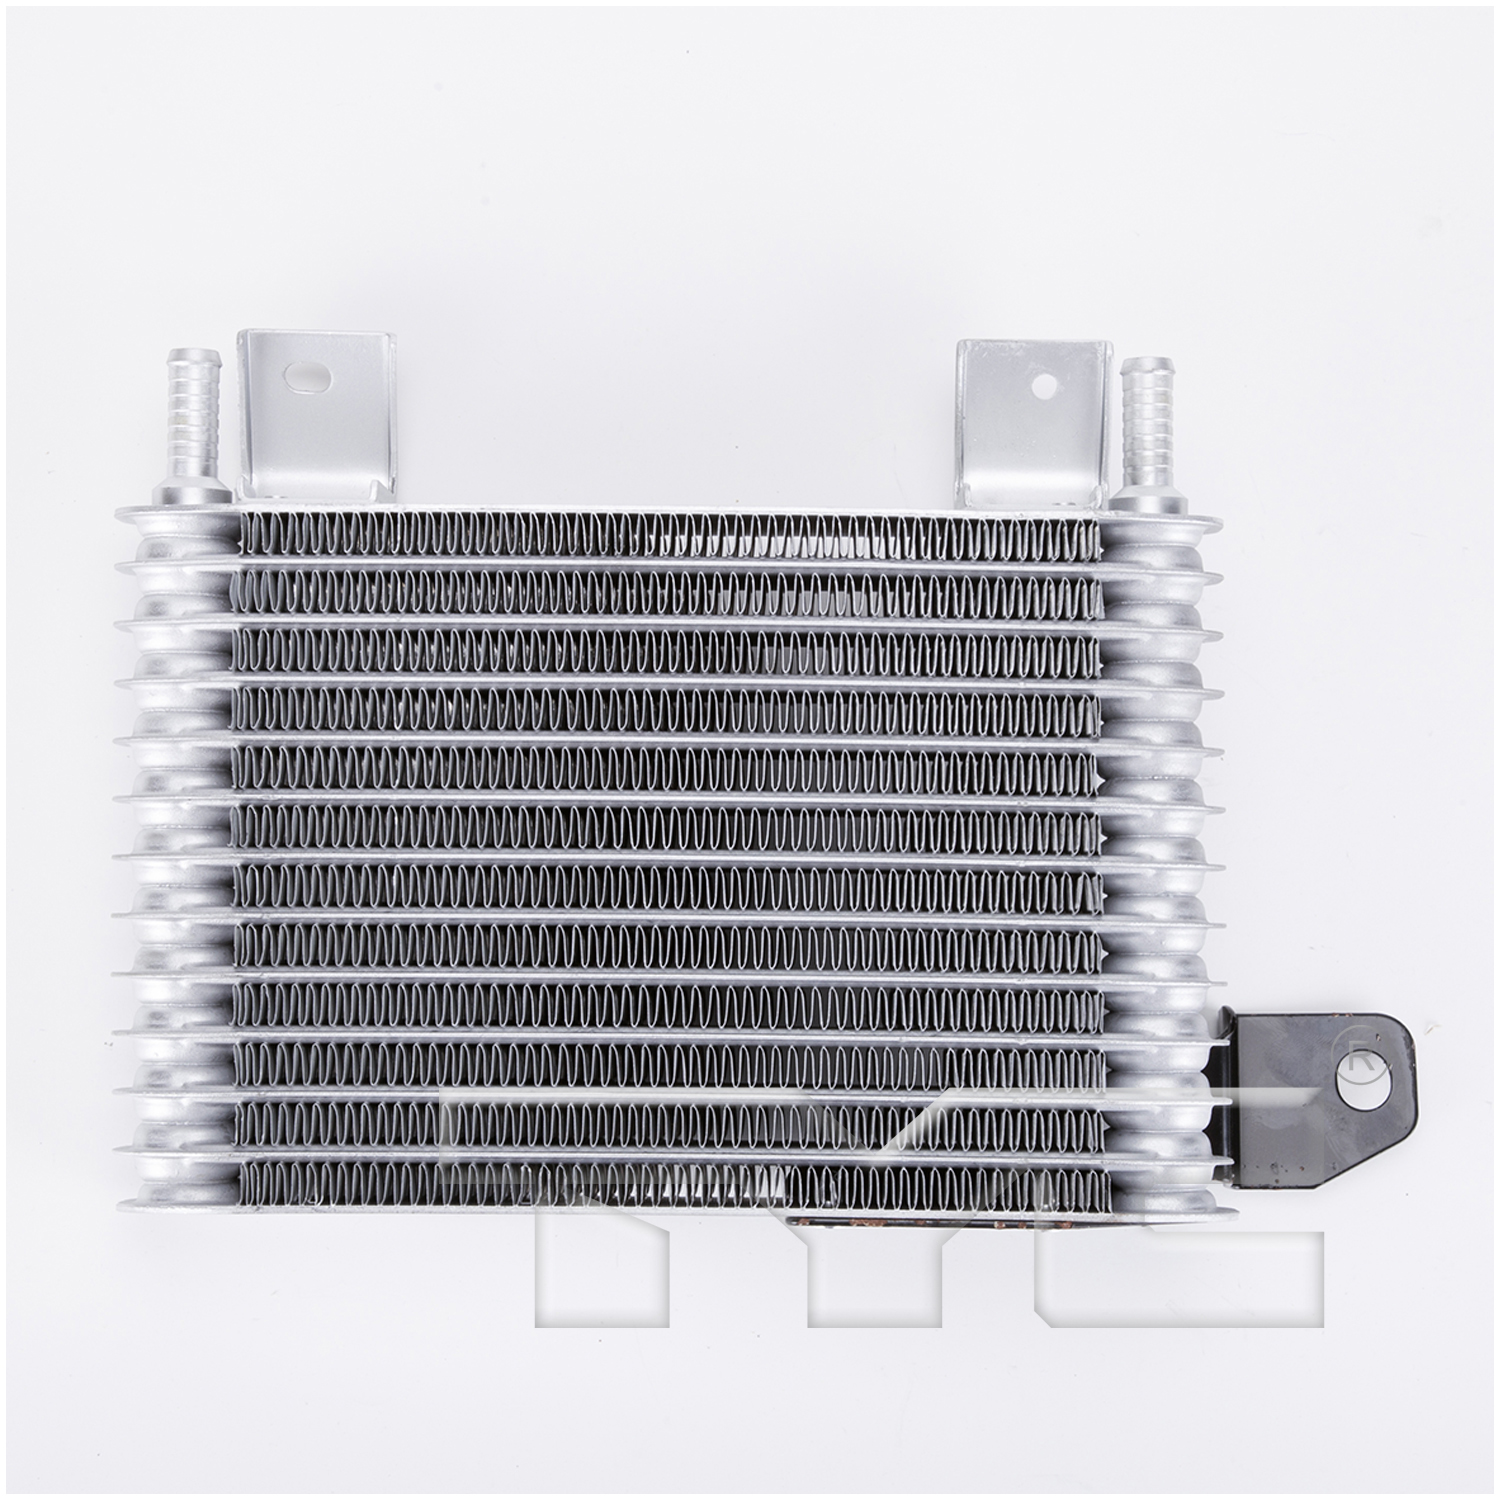 Aftermarket RADIATORS for MERCURY - MOUNTAINEER, MOUNTAINEER,06-10,Transmission cooler assembly